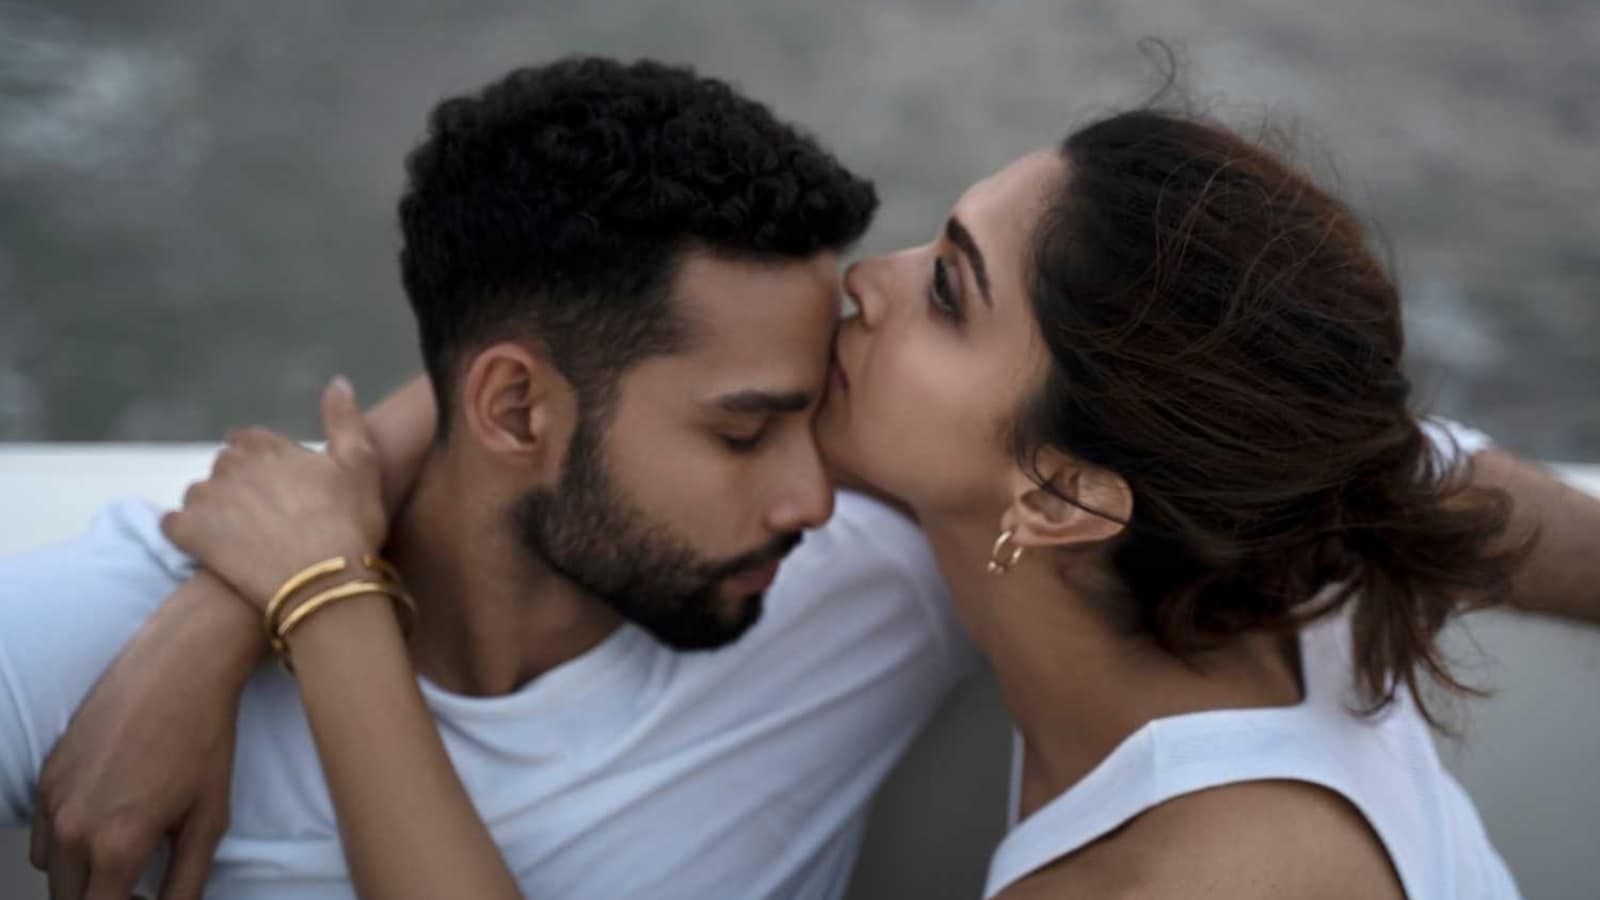 Siddhant Chaturvedi says younger brother had a crush on Deepika Padukone, ‘kept blushing’ when he met her